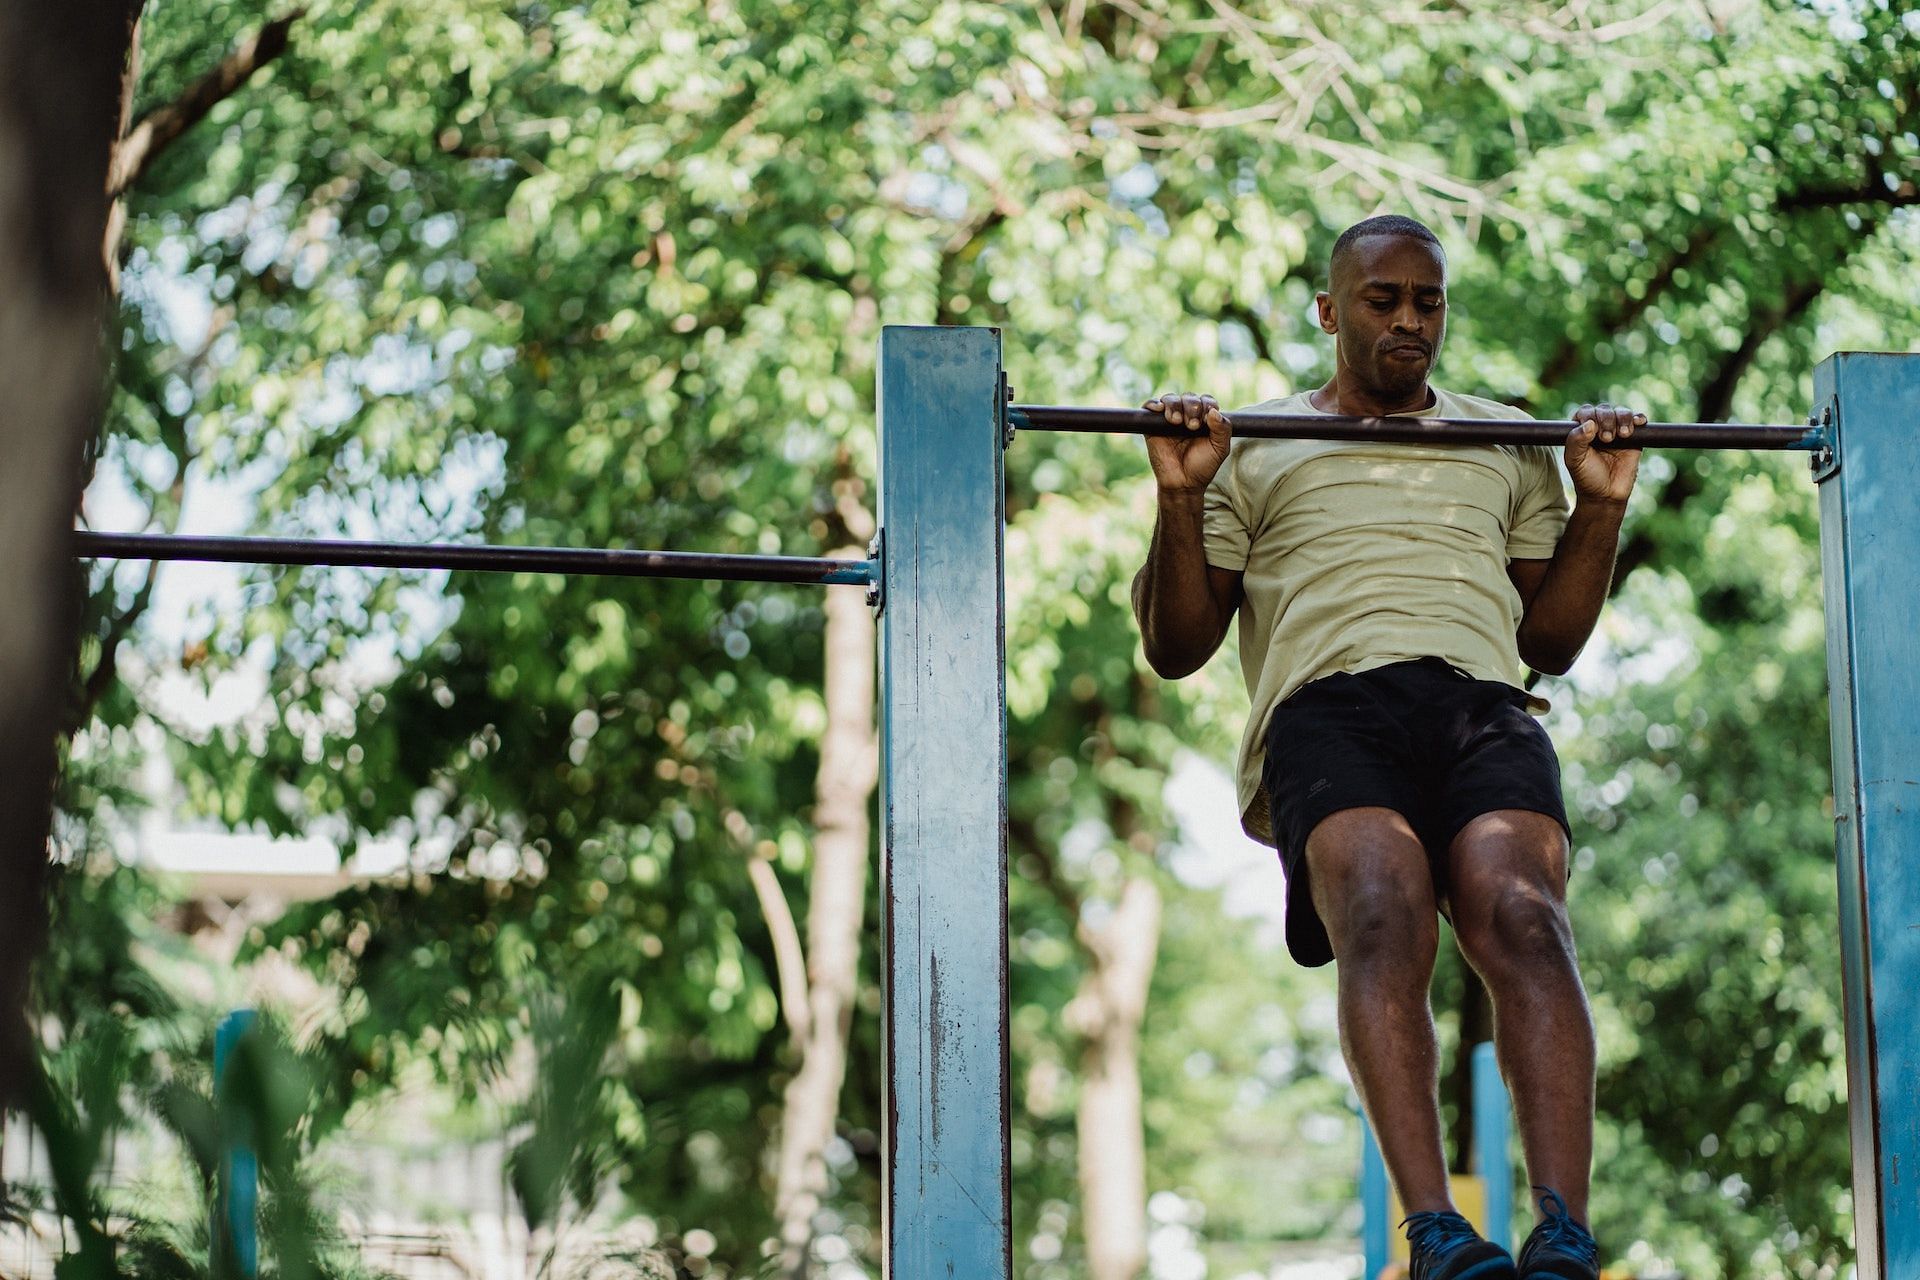 Chest-to-bar pull-ups are an effective upper body exercise. (Photo via Pexels/Ketut Subiyanto)